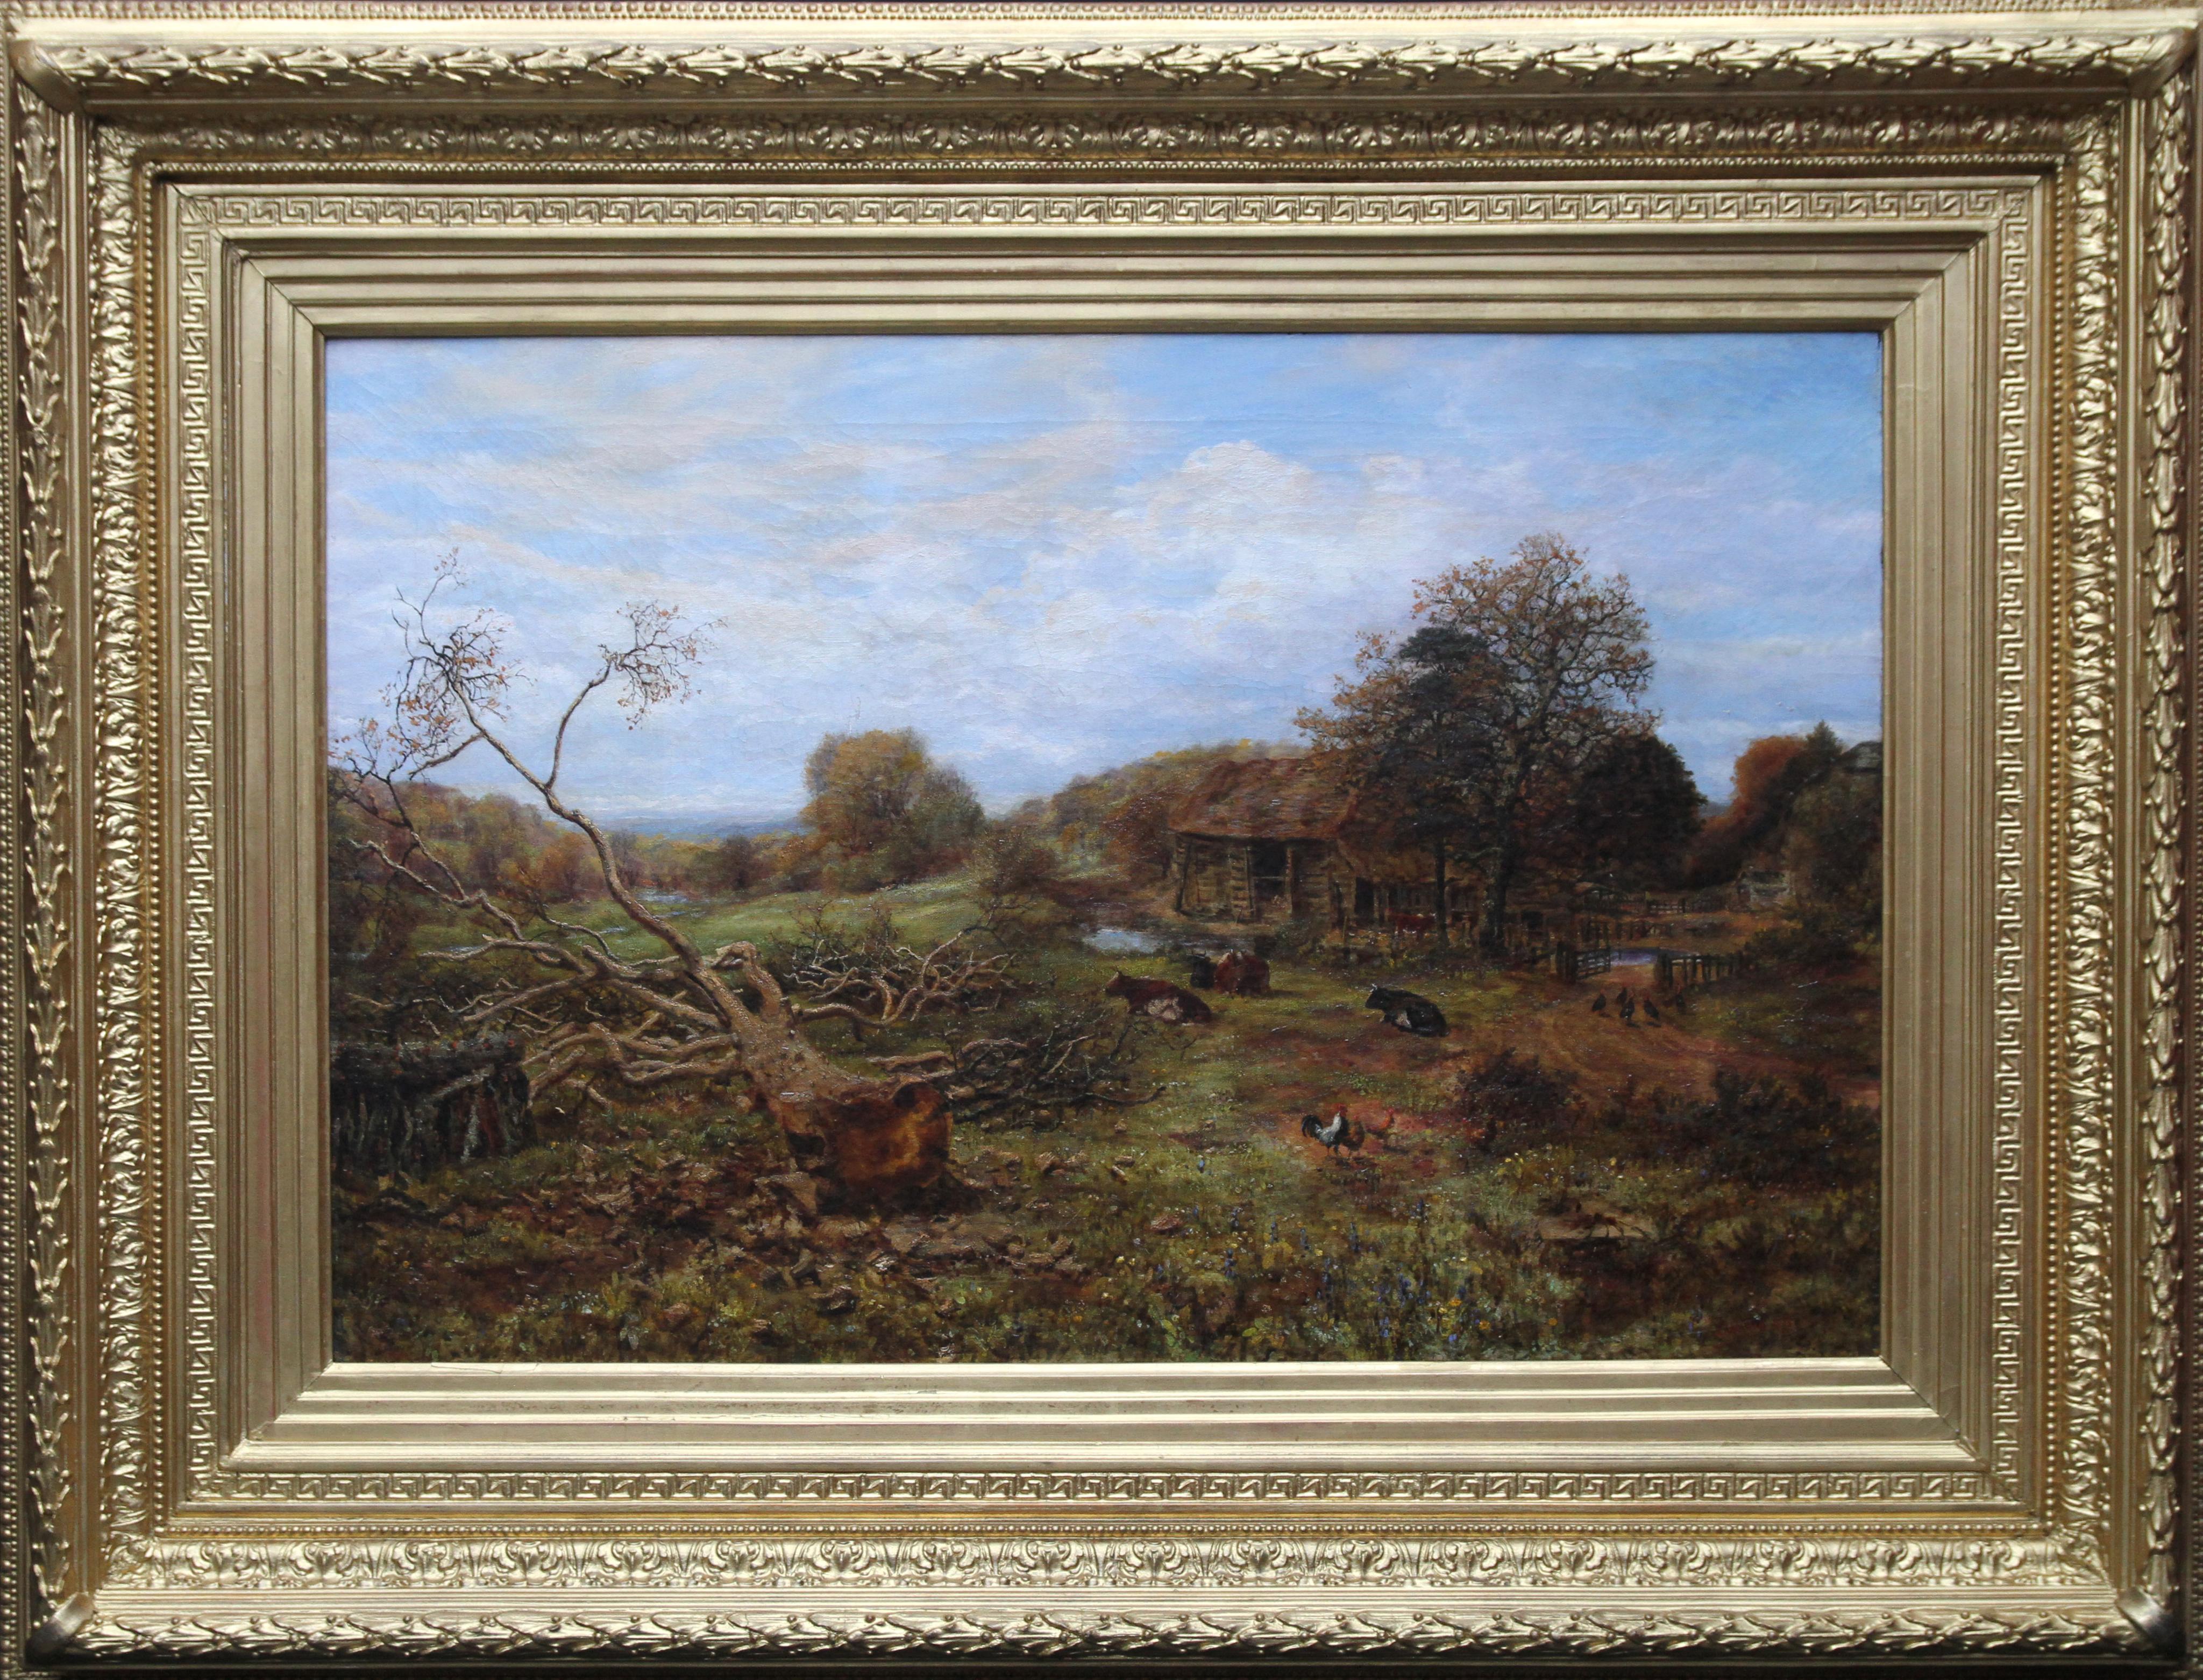 Landscape with Cattle - Surrey - British Victorian art 19th century oil painting